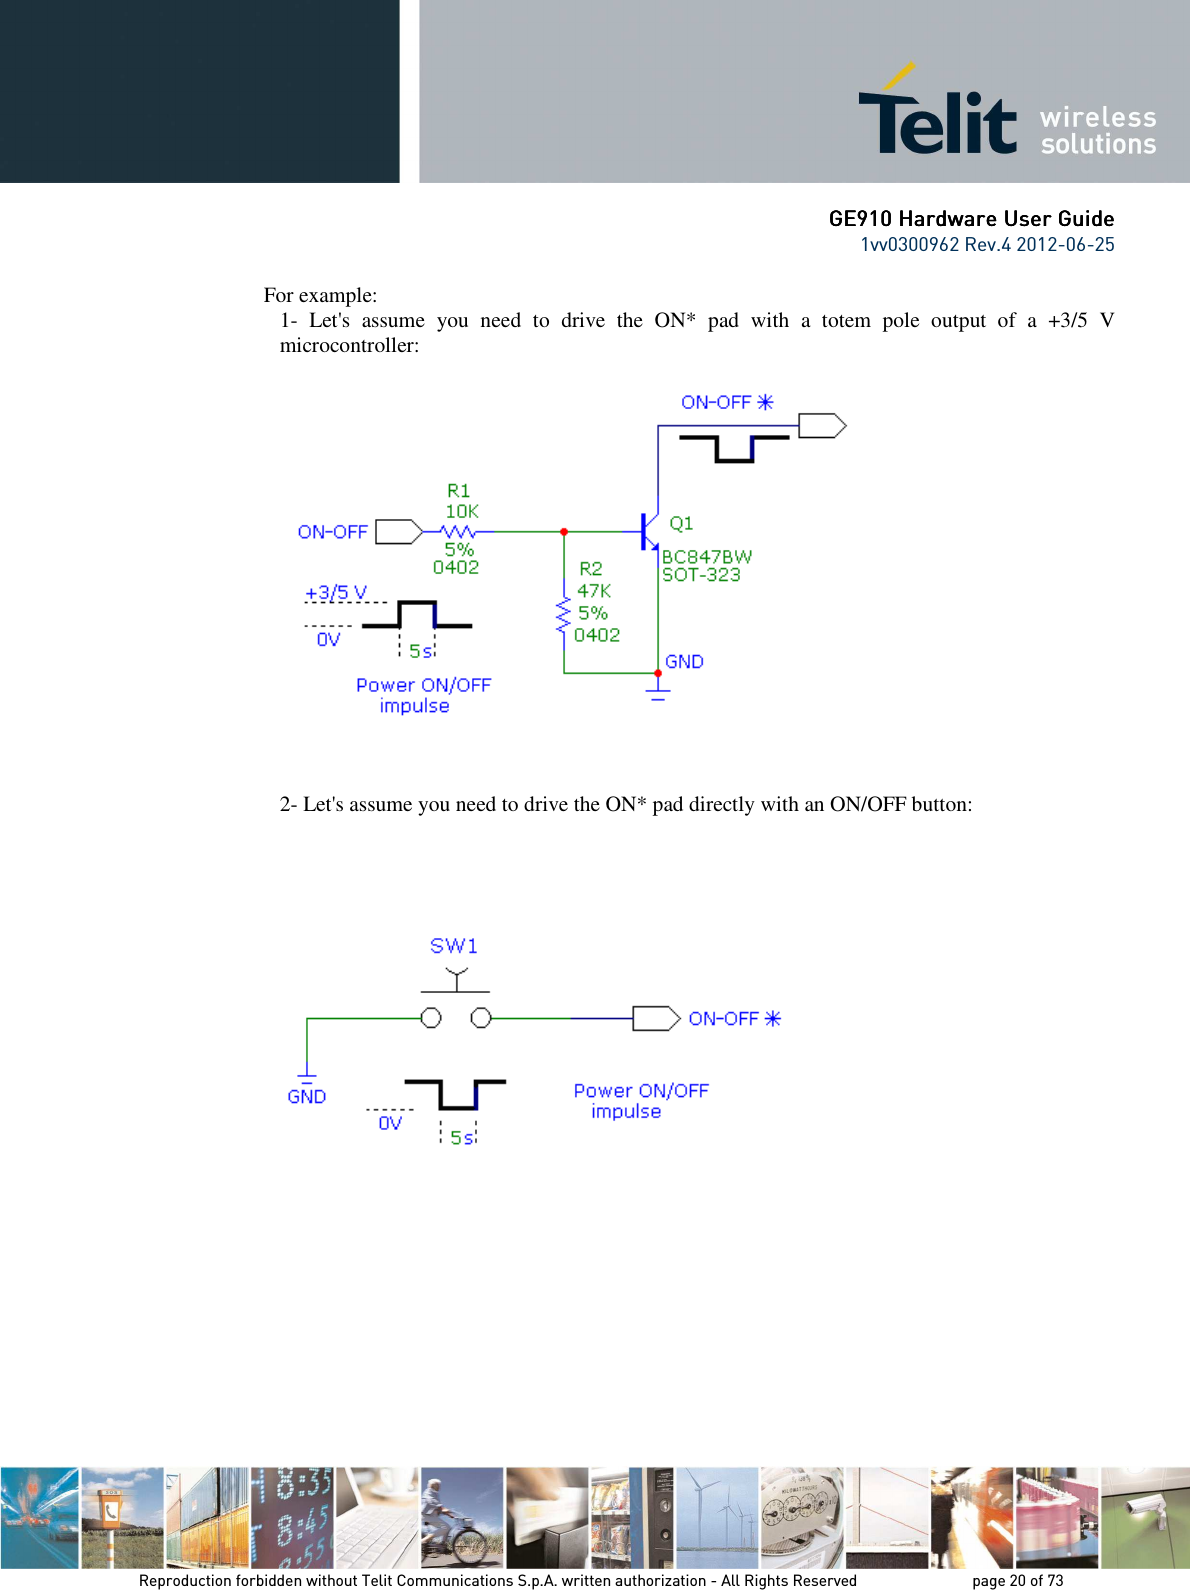      GE9GE9GE9GE910 Hardware User Guide10 Hardware User Guide10 Hardware User Guide10 Hardware User Guide    1vv0300962 Rev.4 2012-06-25    Reproduction forbidden without Telit Communications S.p.A. written authorization - All Rights Reserved    page 20 of 73 Mod. 0805 2011-07 Rev.2 For example: 1-  Let&apos;s  assume  you  need  to  drive  the  ON*  pad  with  a  totem  pole  output  of  a  +3/5  V microcontroller:      2- Let&apos;s assume you need to drive the ON* pad directly with an ON/OFF button:         